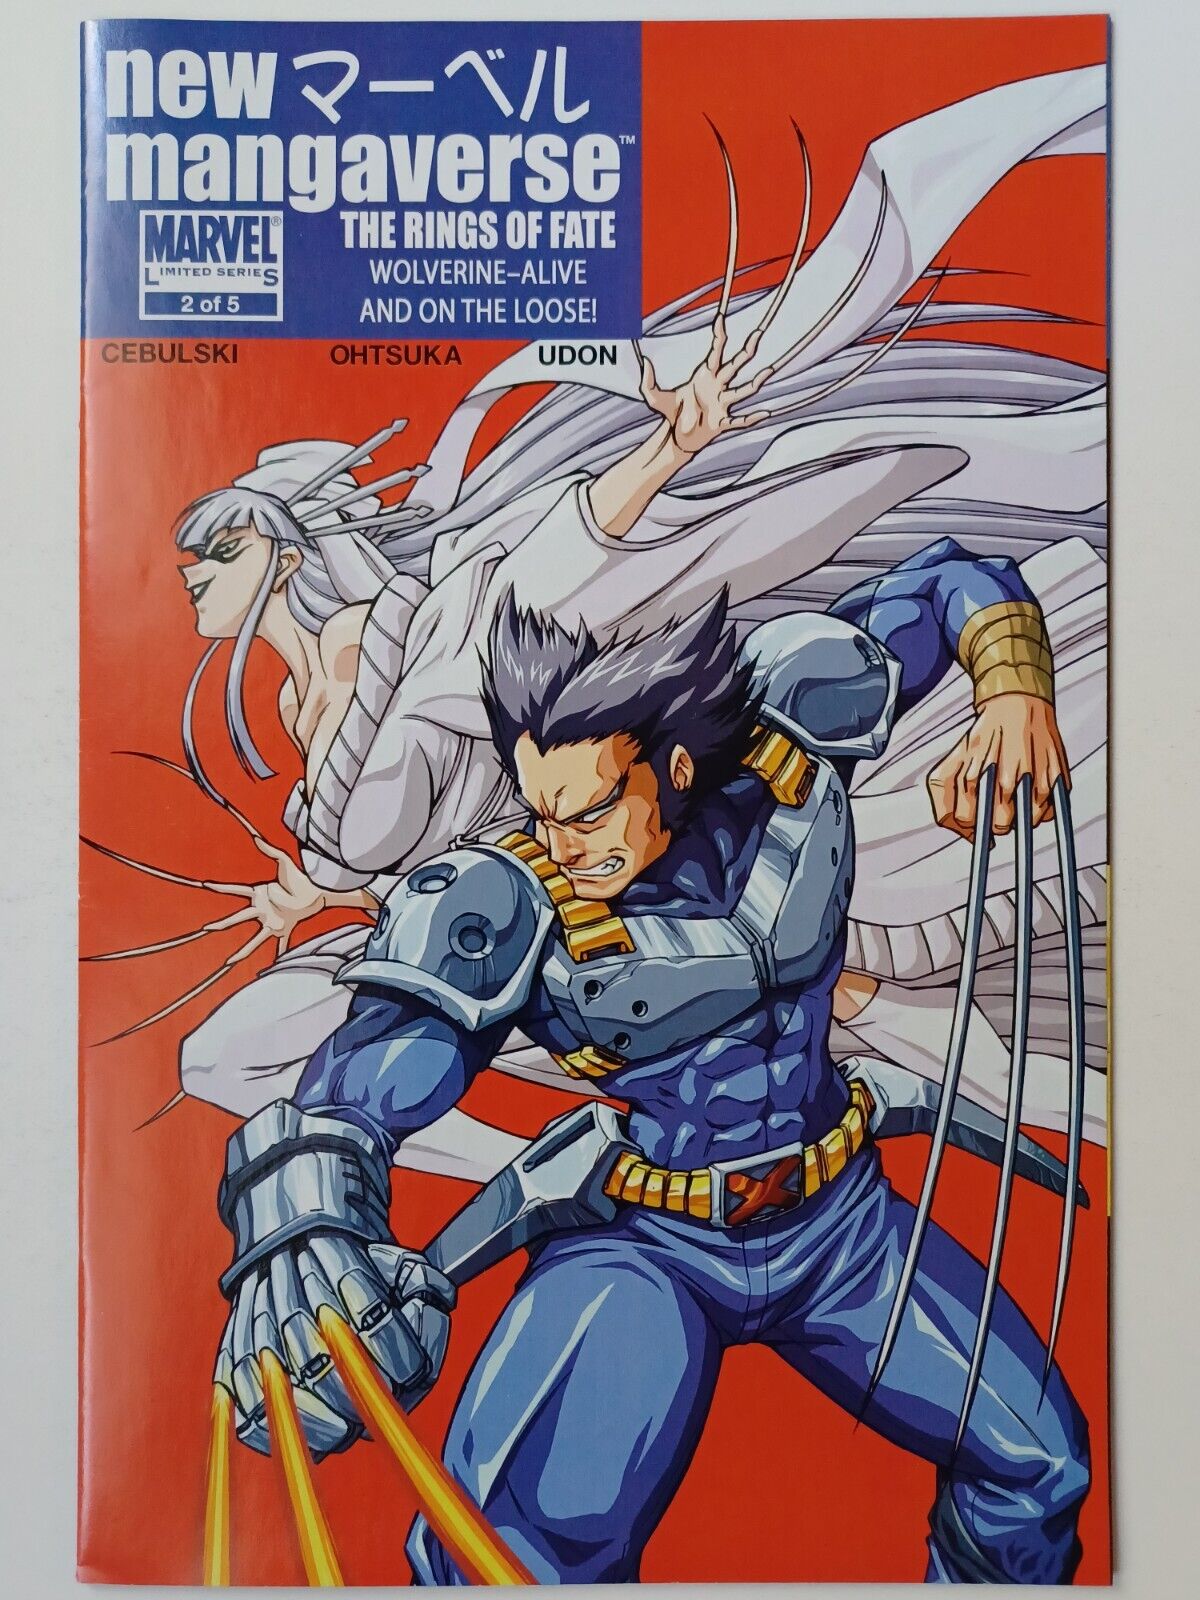 Marvel New Mangaverse #2 Of 5 - The Rings Of Fate - Wolverine Cover